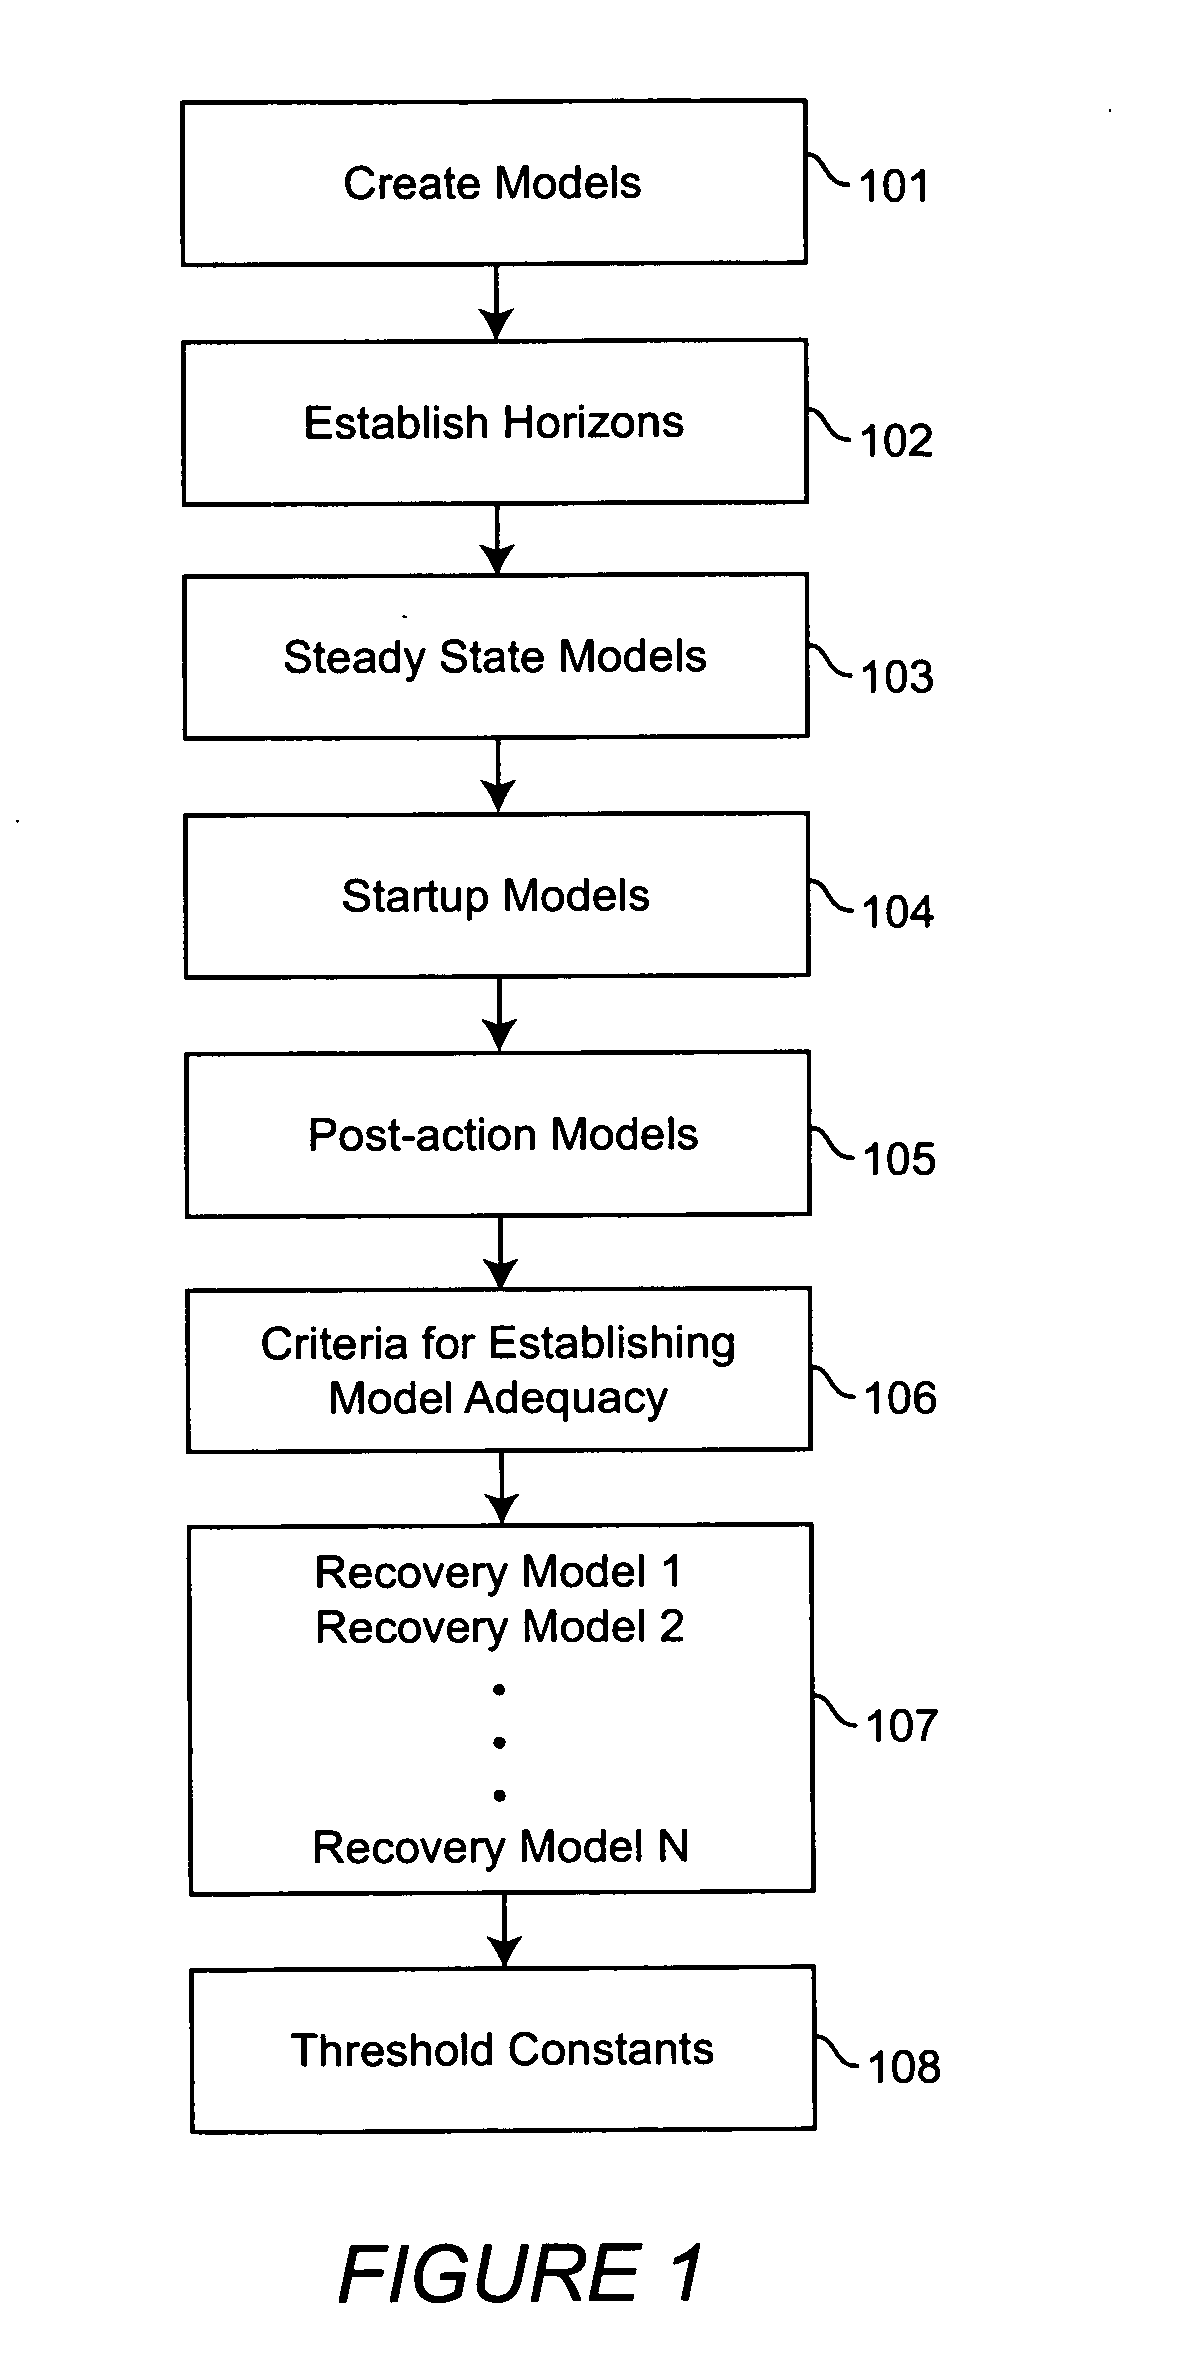 System and method of predicting future behavior of a battery of end-to-end probes to anticipate and prevent computer network performance degradation